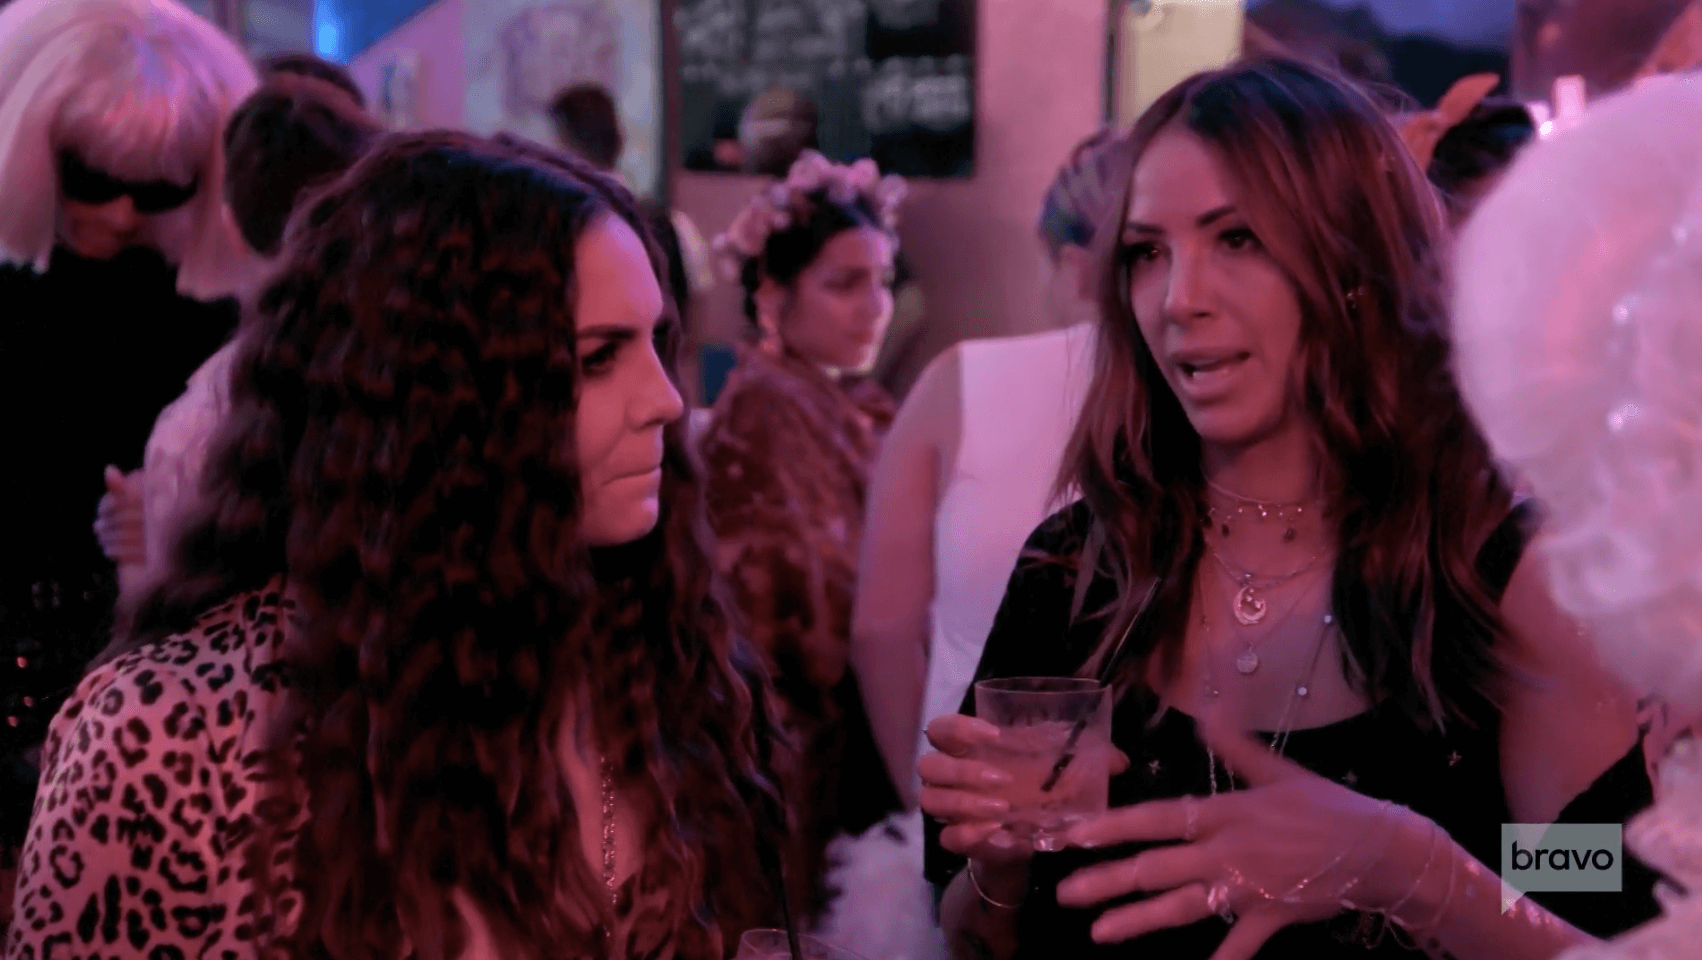 RECAP: Mean Girls Stassi and Katie End Their Friendship With Kristen In Ruthless Blowout On ‘Vanderpump Rules’